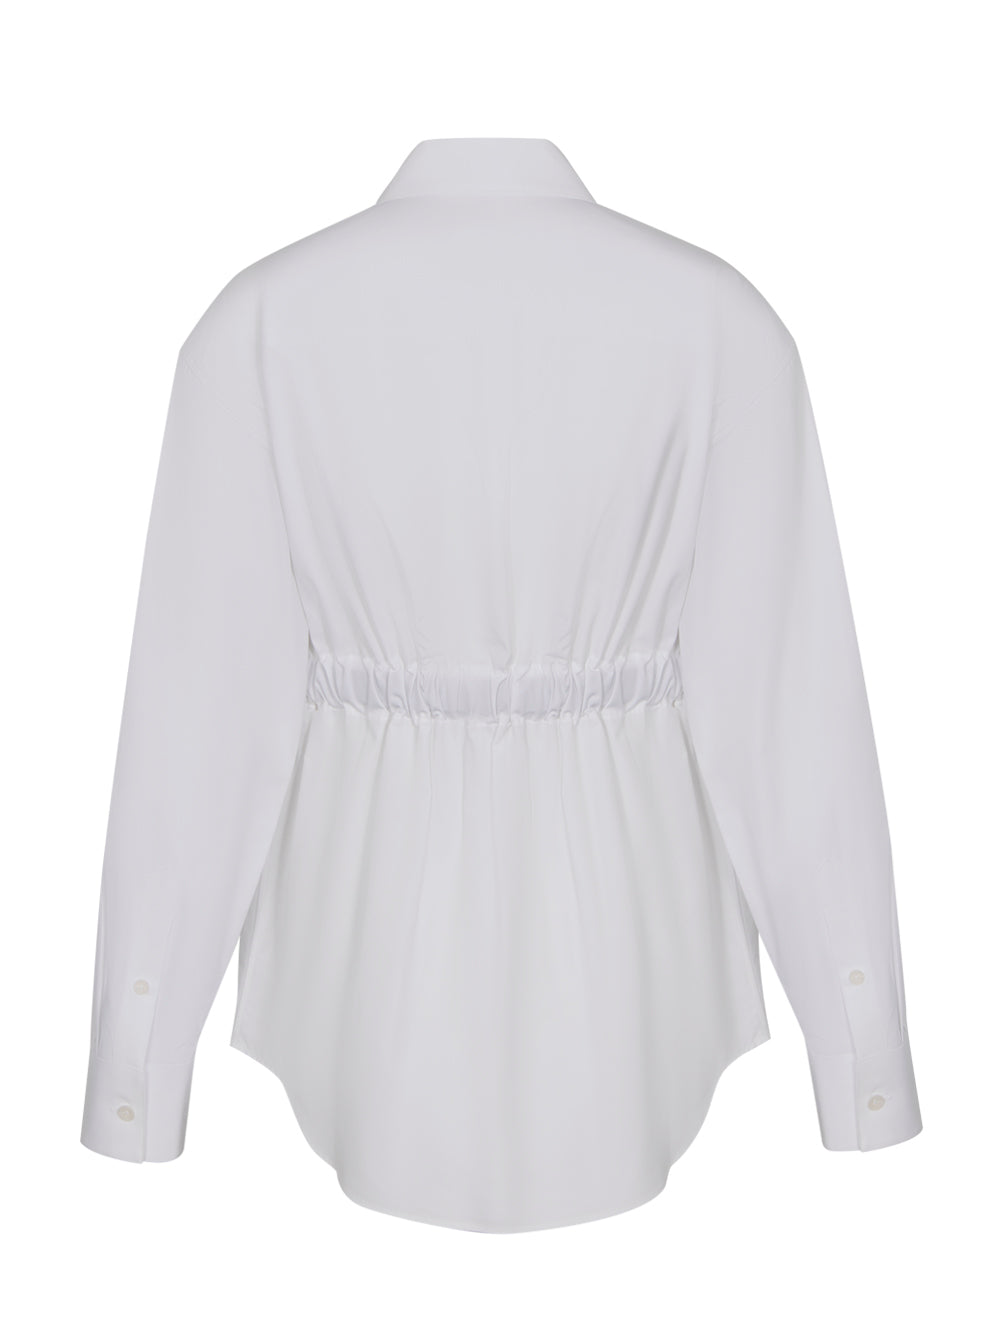 Button Down Tunic With Integrated Leather Belt (White)